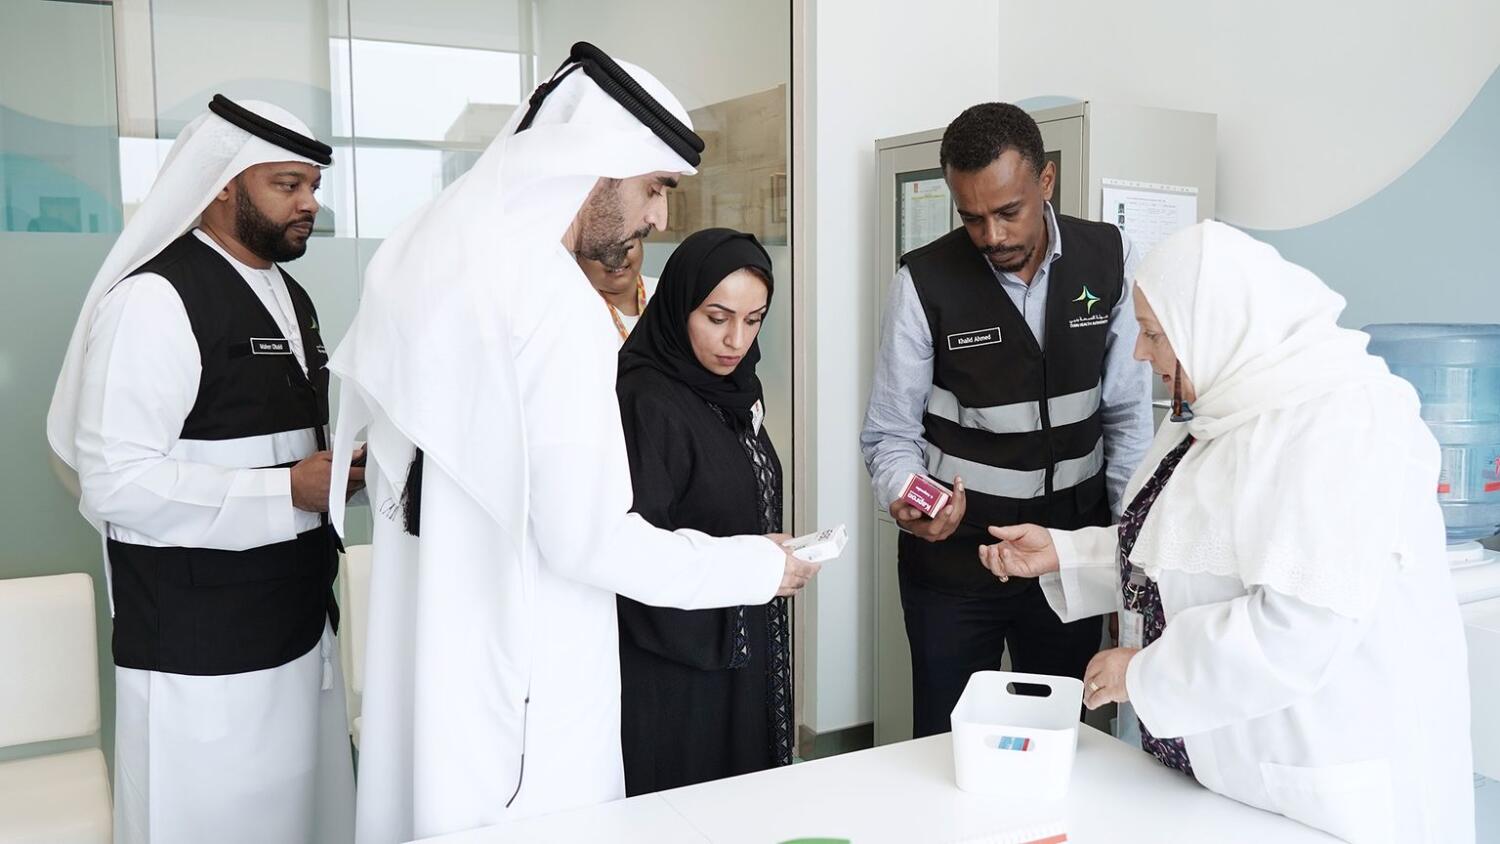 Private schools clinics in Dubai inspected by authority